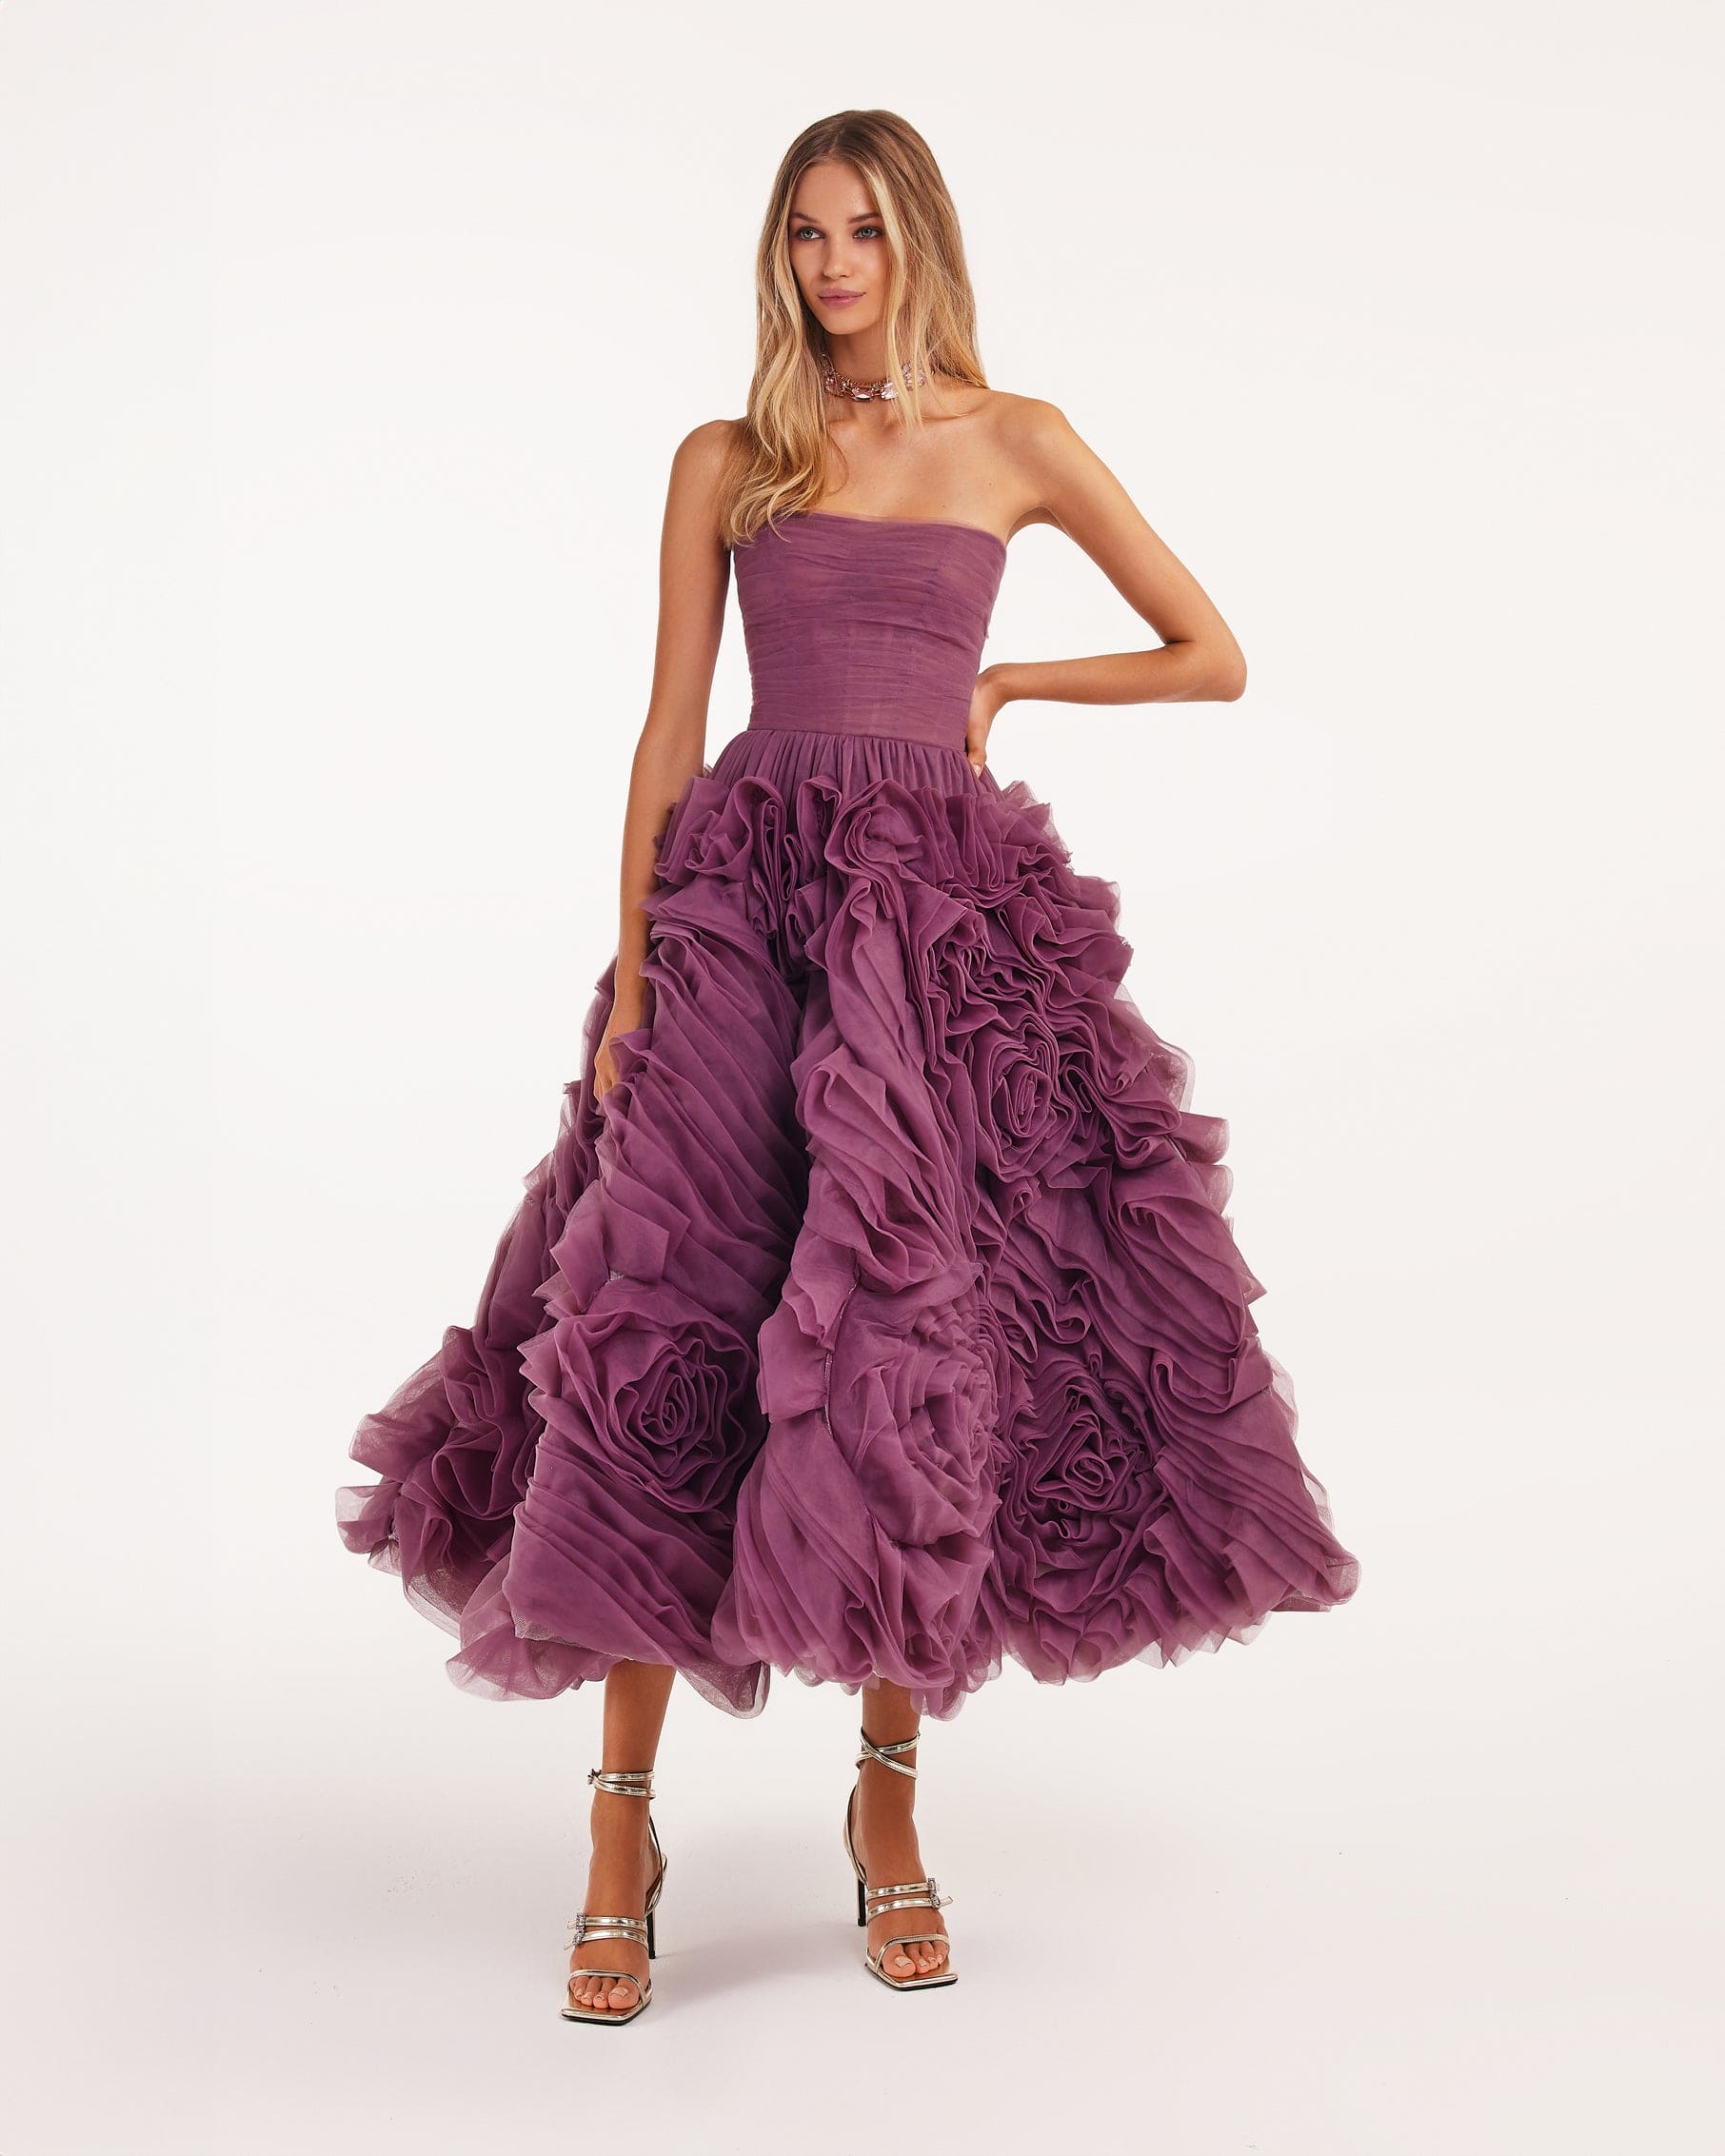 Dramatically flowered tulle dress in wine color